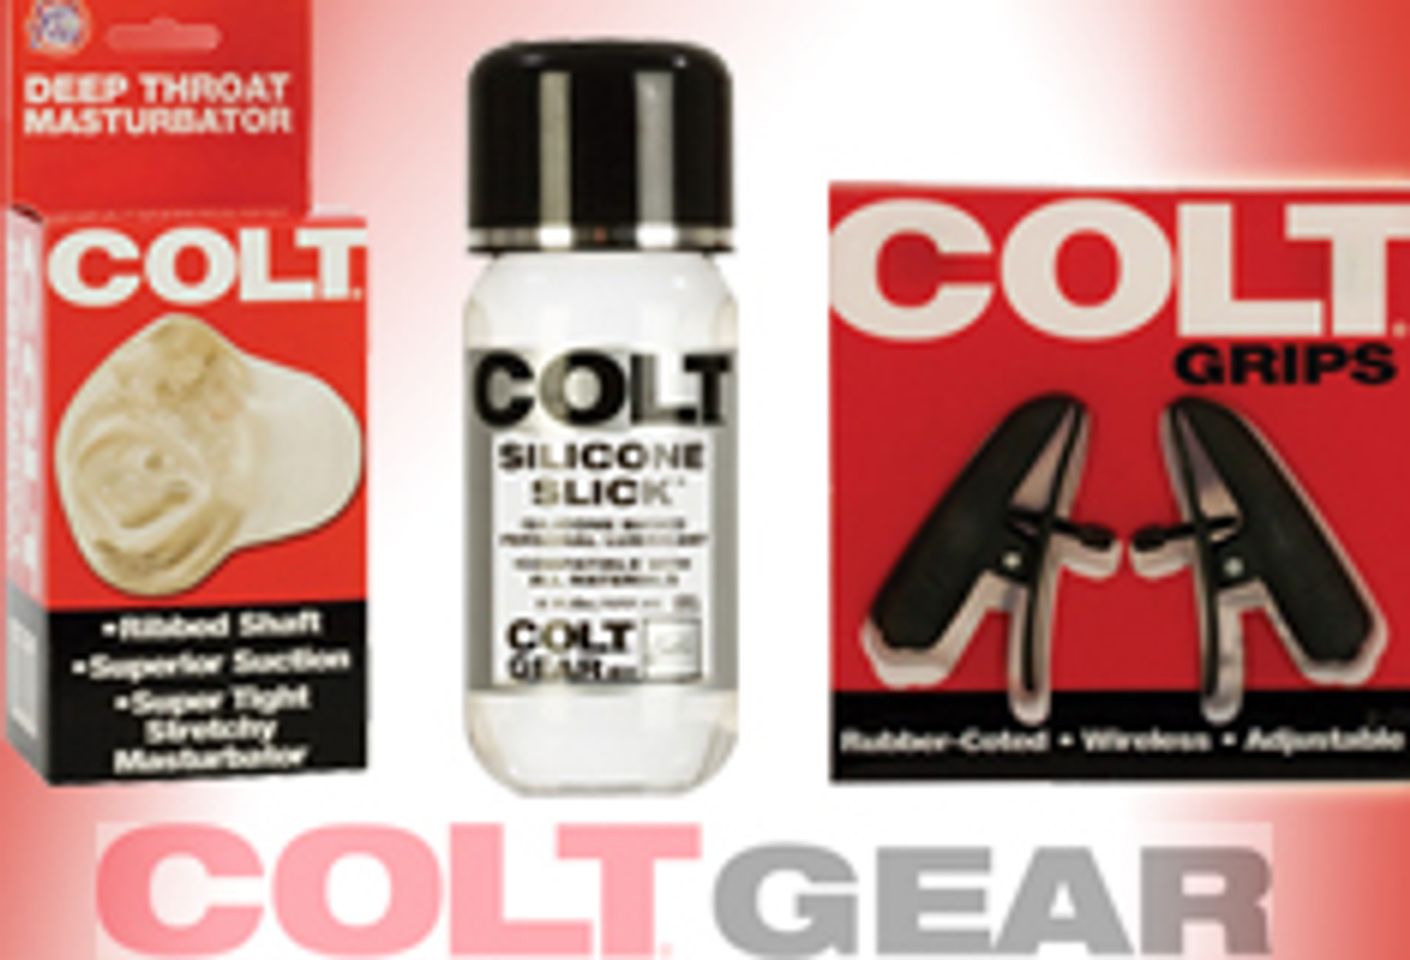 COLT Gear Announces New Products for October